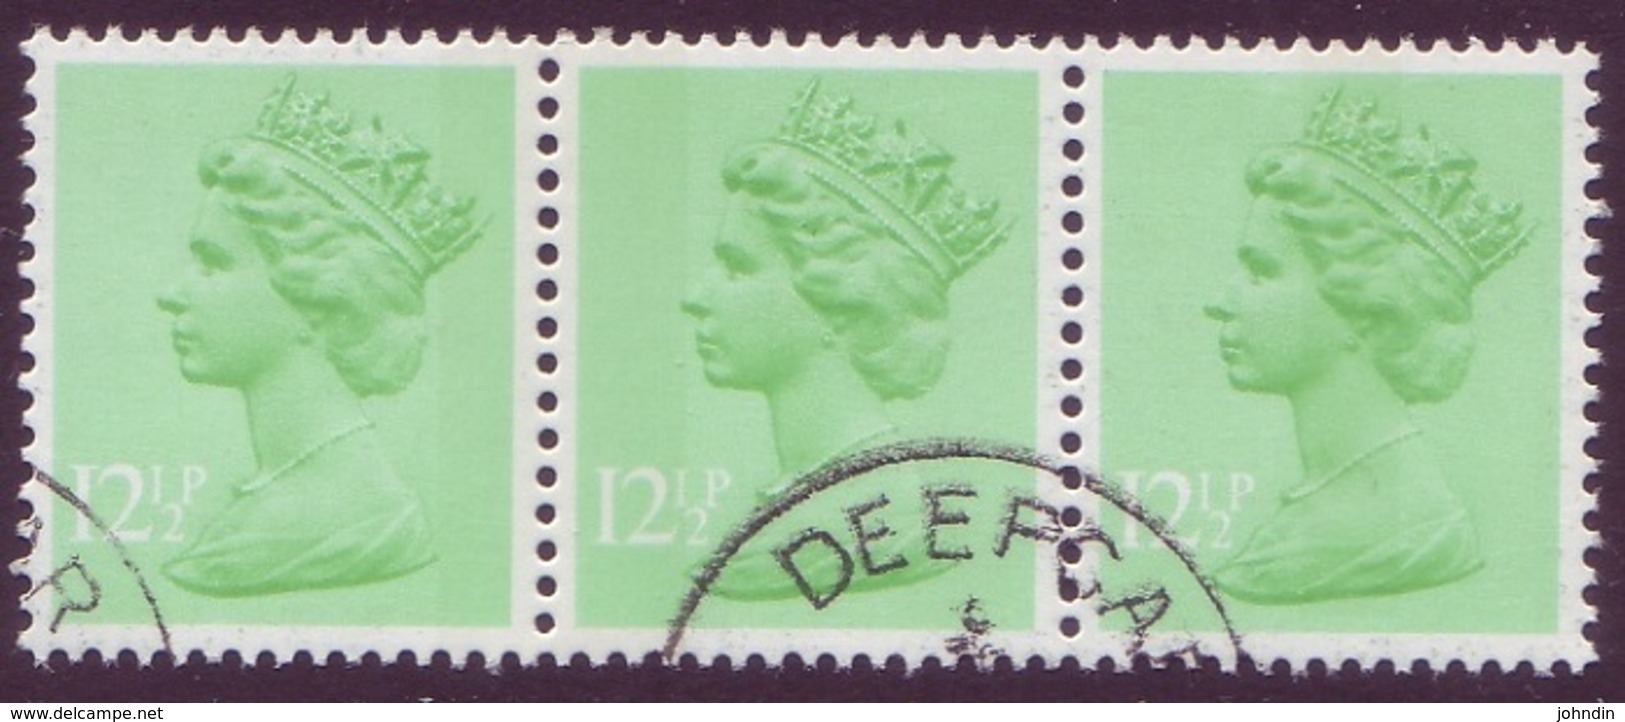 1982 Strip Of 3 X 12½p GB Machins One Has Band At Right, One At Left And One In Center SG X898  X899 & SG X899Ea Used - Machins